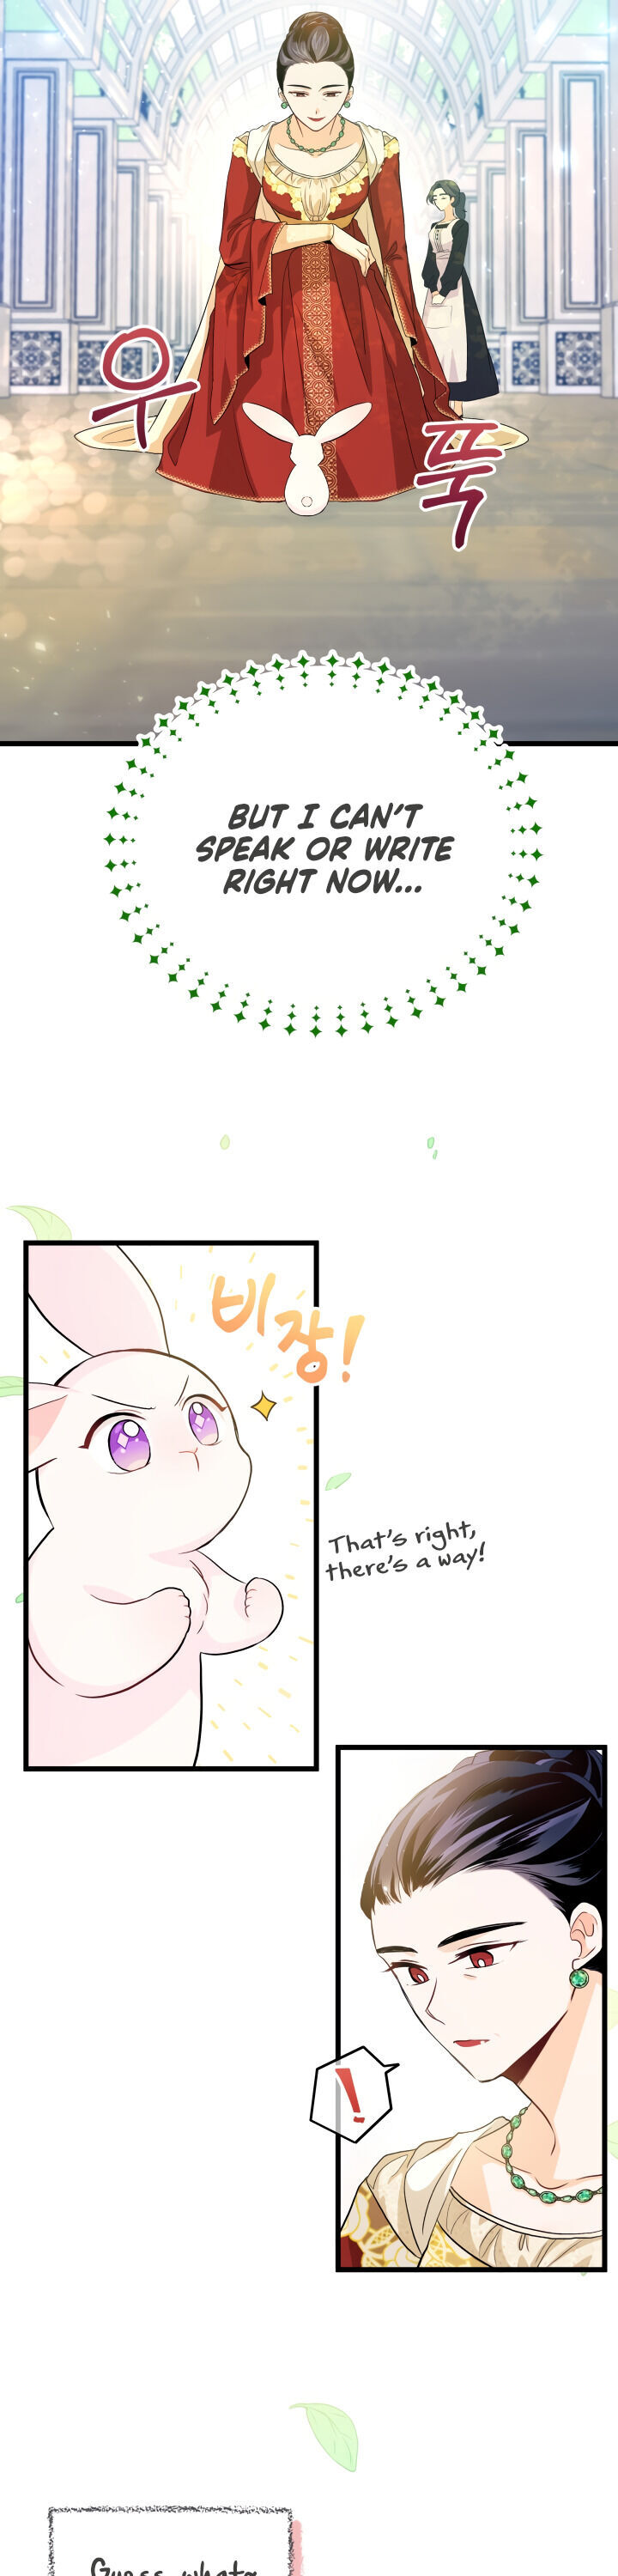 The Symbiotic Relationship Between A Rabbit and A Black Panther - Chapter 11 Page 19